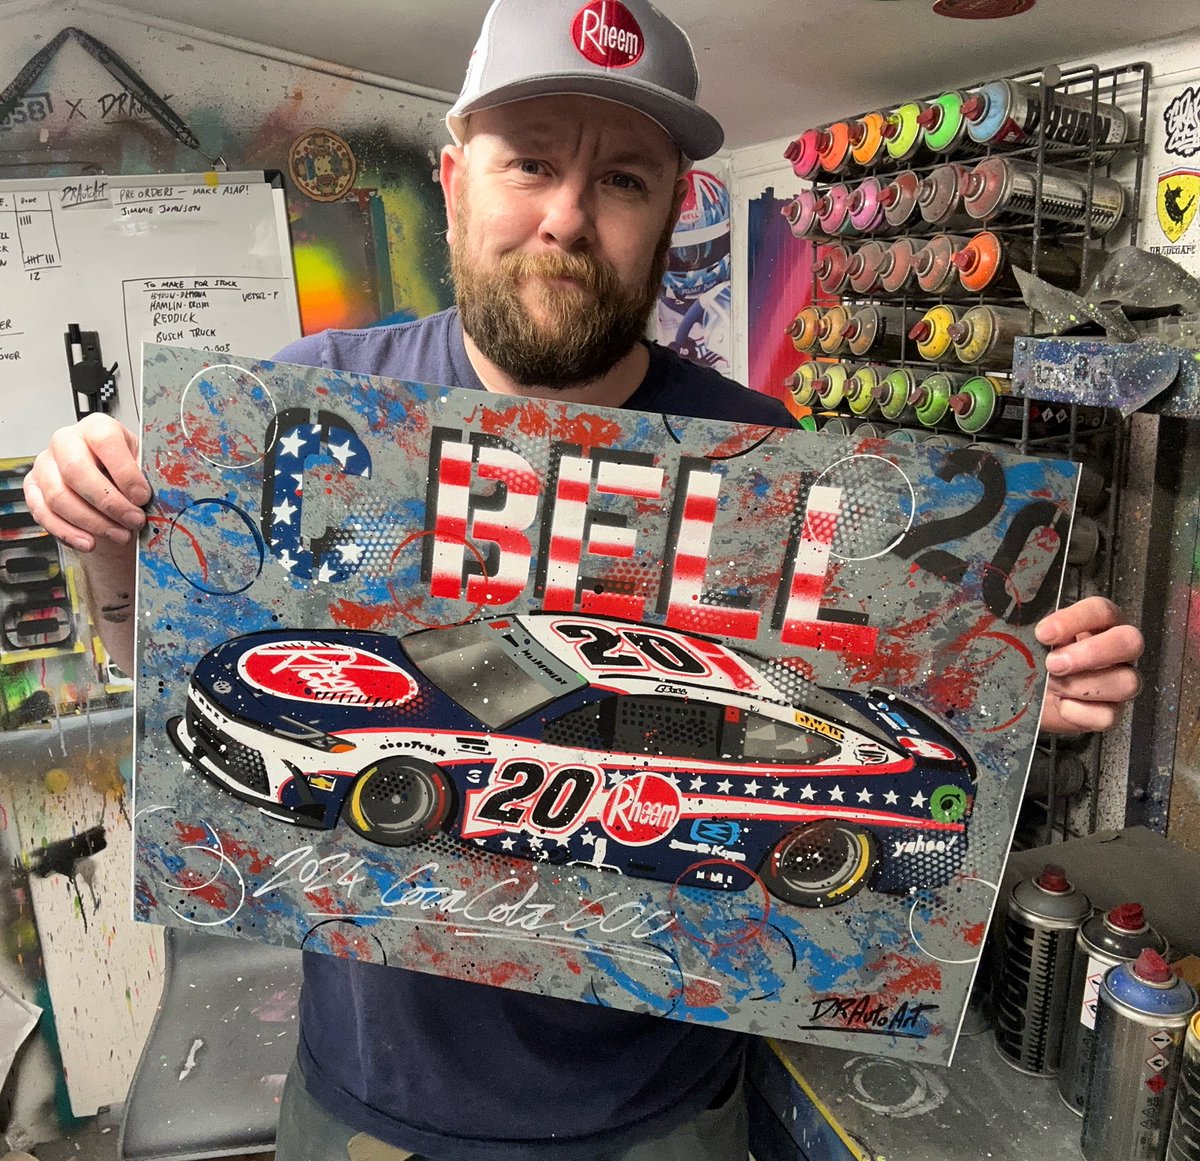 @CBellRacing @rheemracing Congrats on the win, Christopher! Would love to get this victory painting to the Kennedy family. Could you help make this happen? 🙌🏻